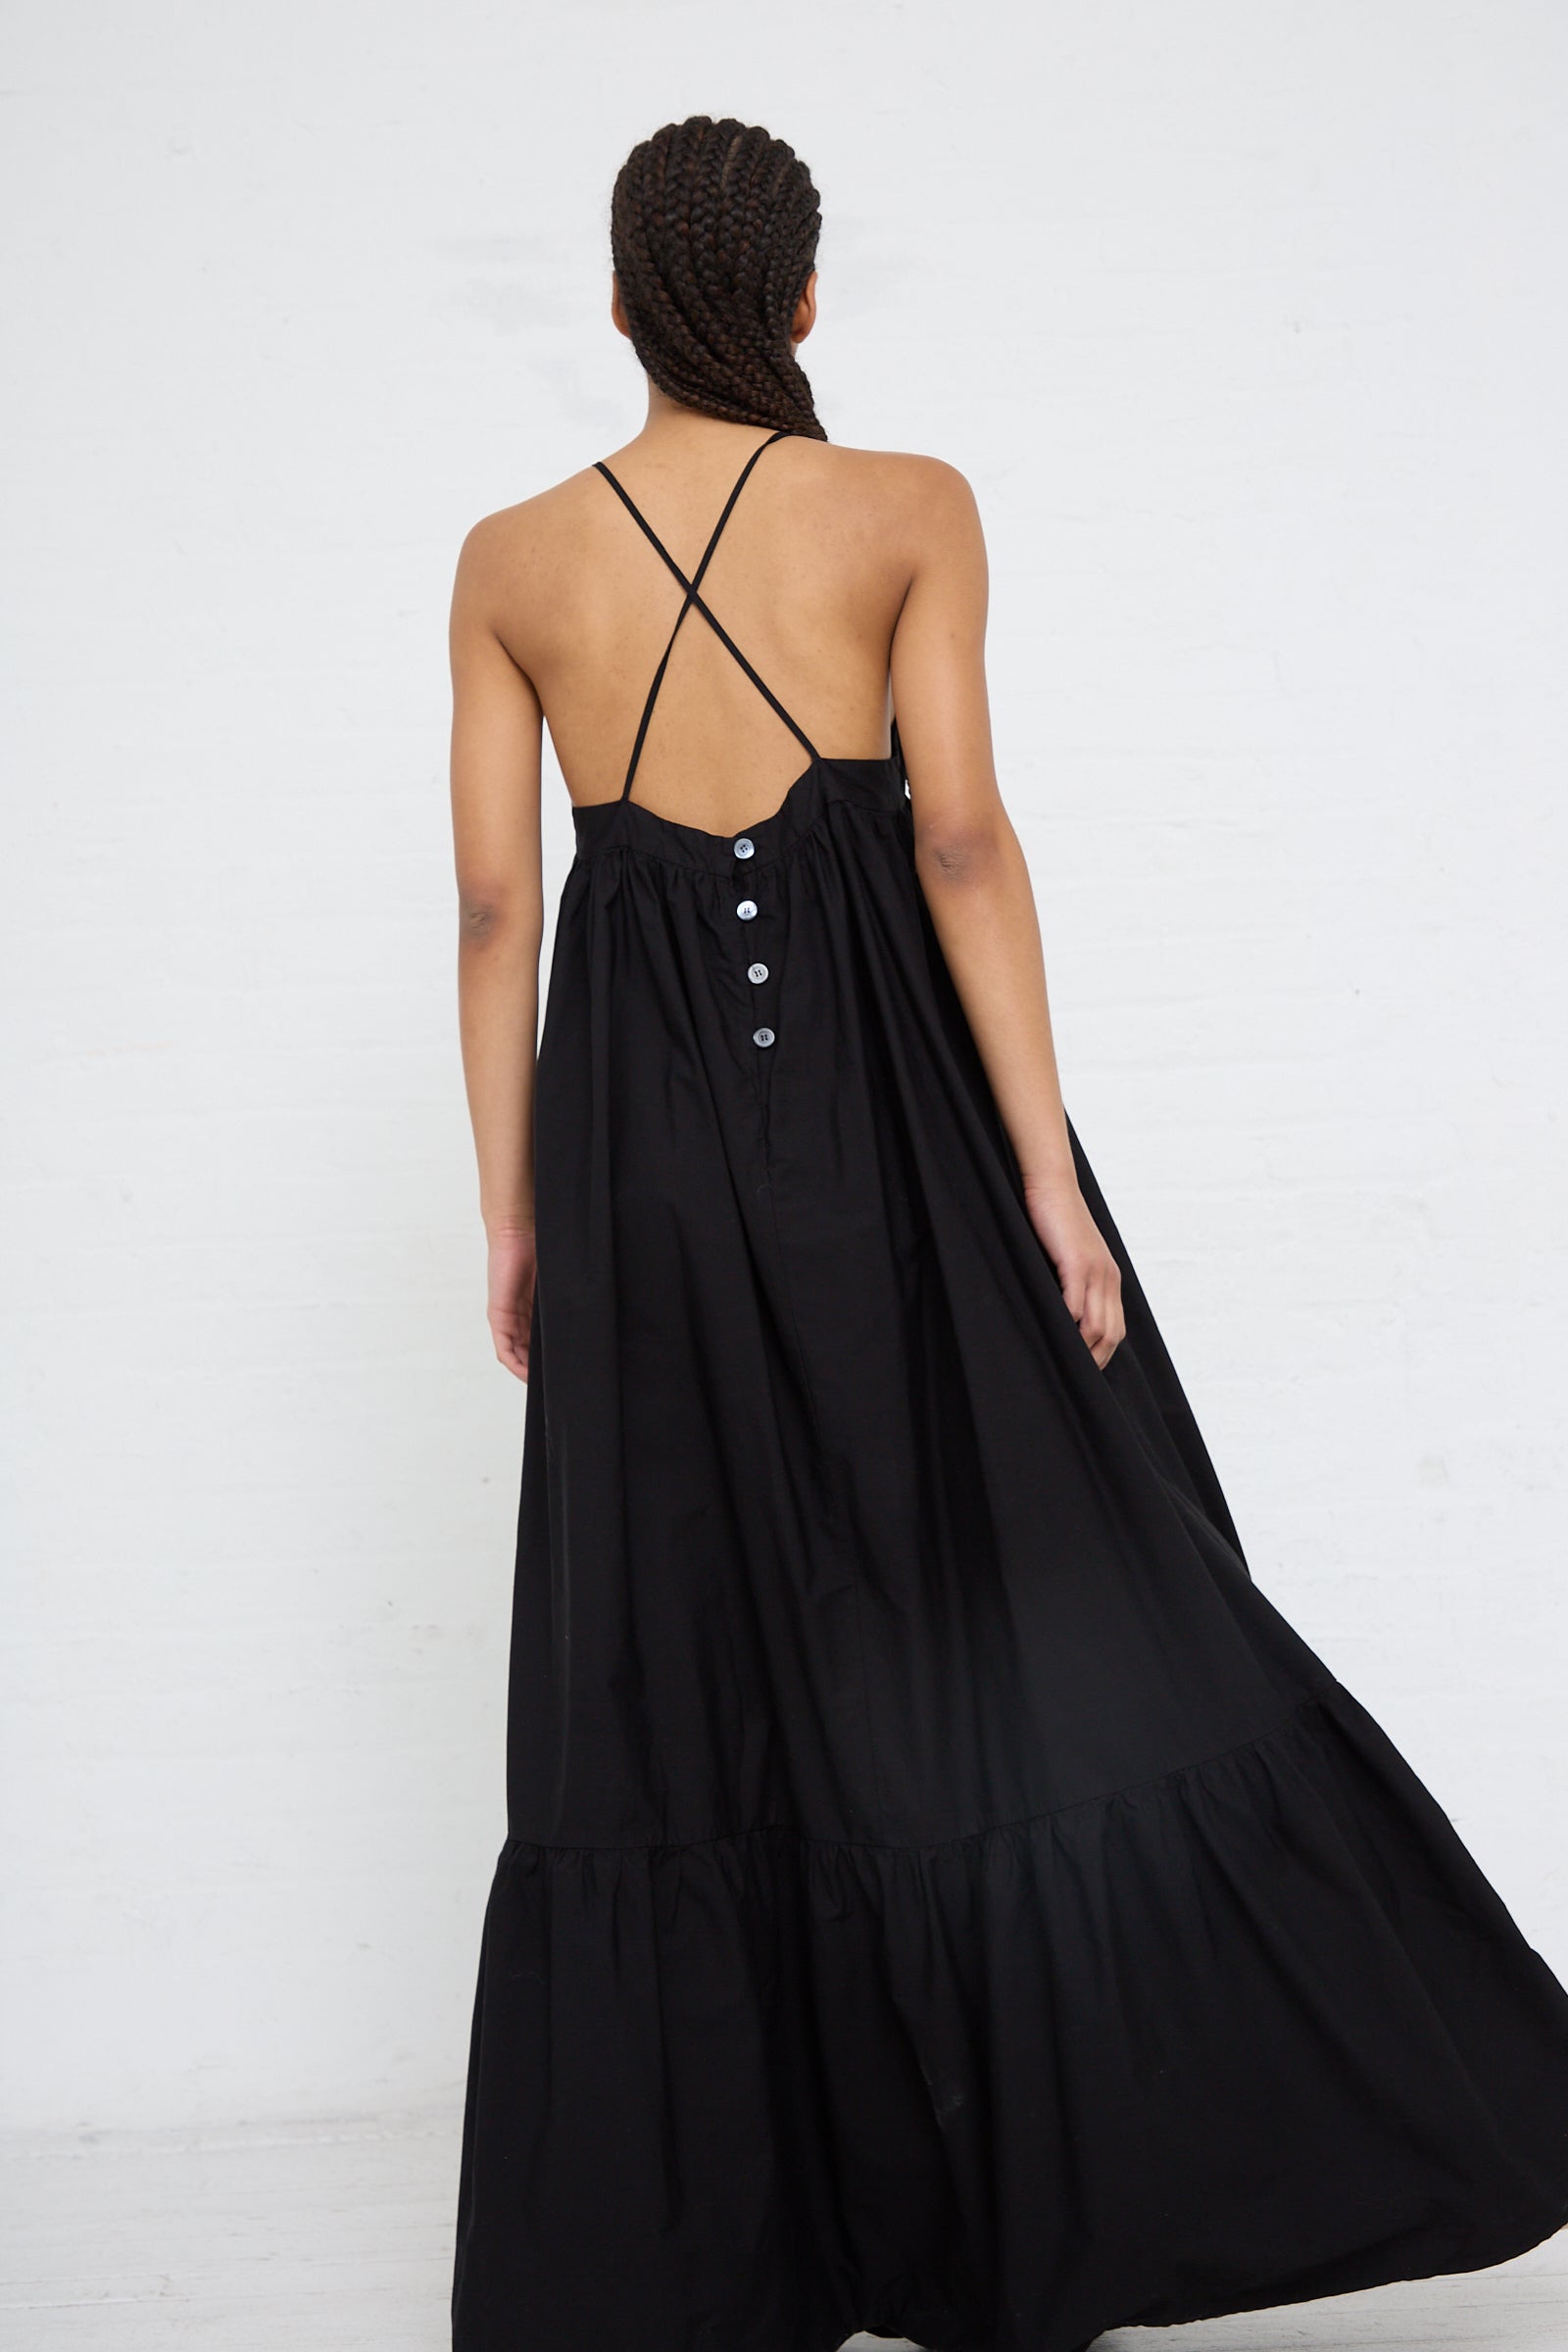 A woman seen from behind wearing a AVN Sun Sational Dress in Black with button detailing and a cross-back strap design, crafted from lightweight cotton.